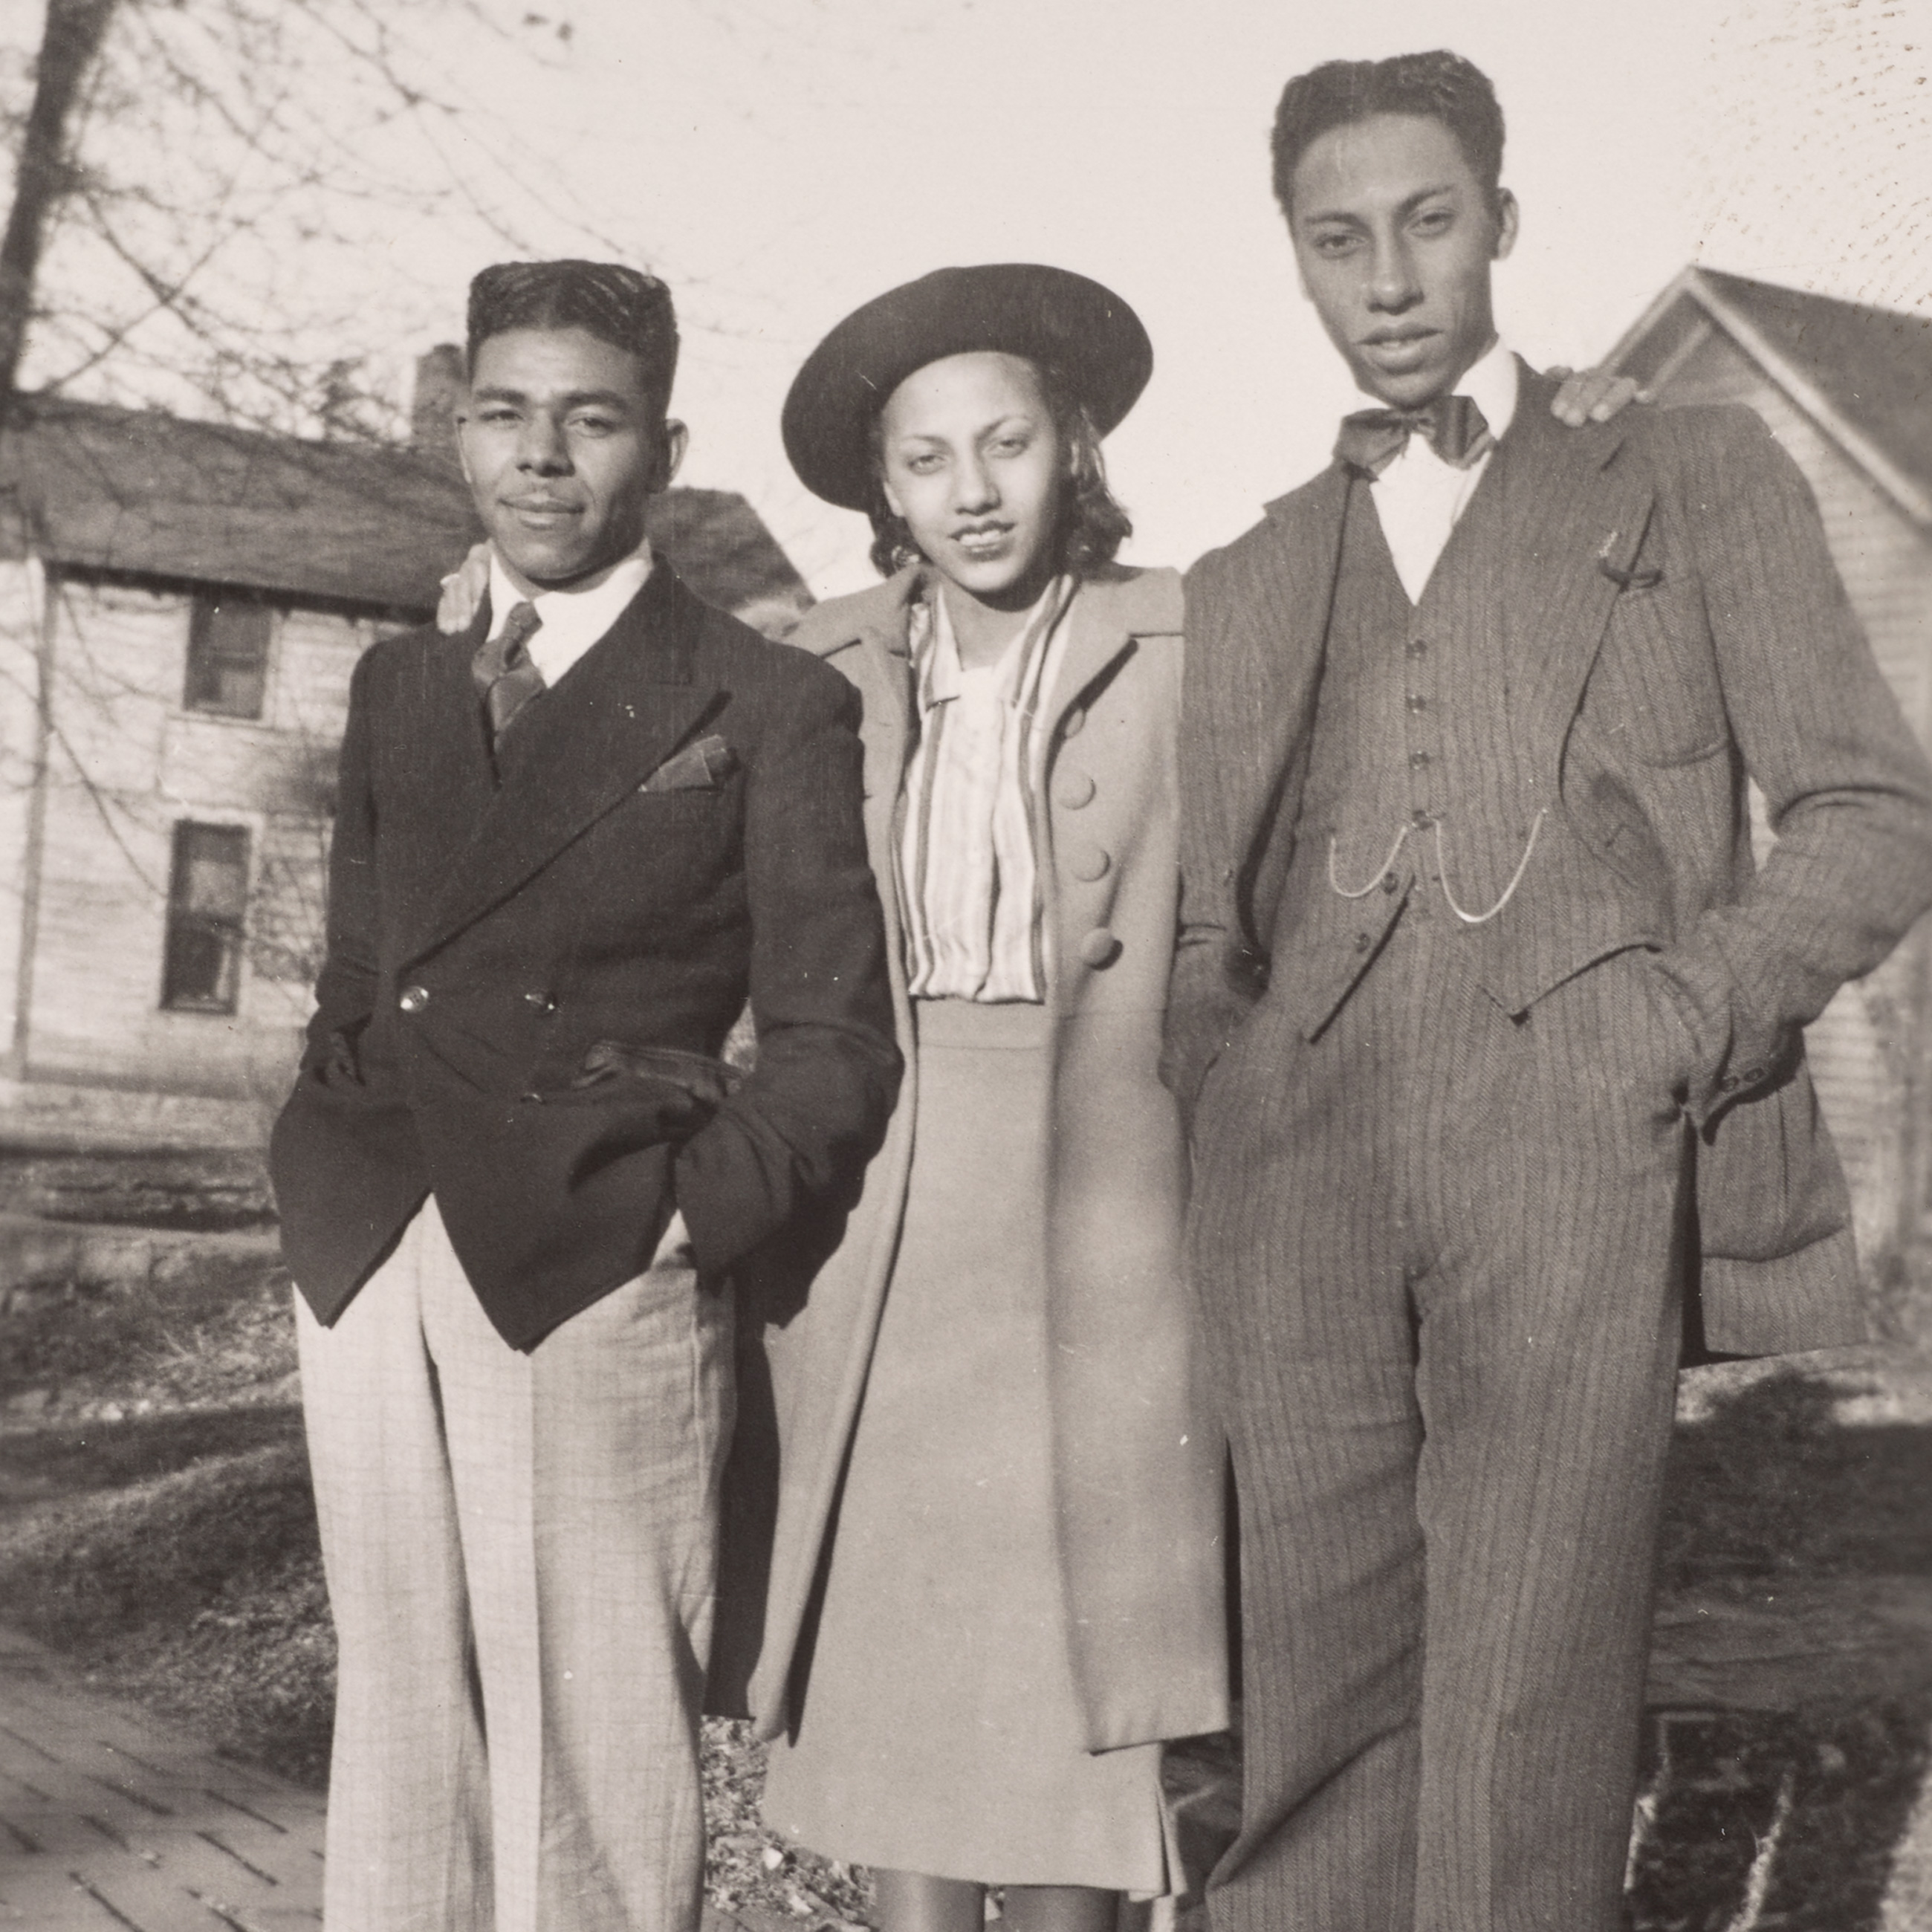 Photos of Black Topekans in the 1920s | Denver Art Museum